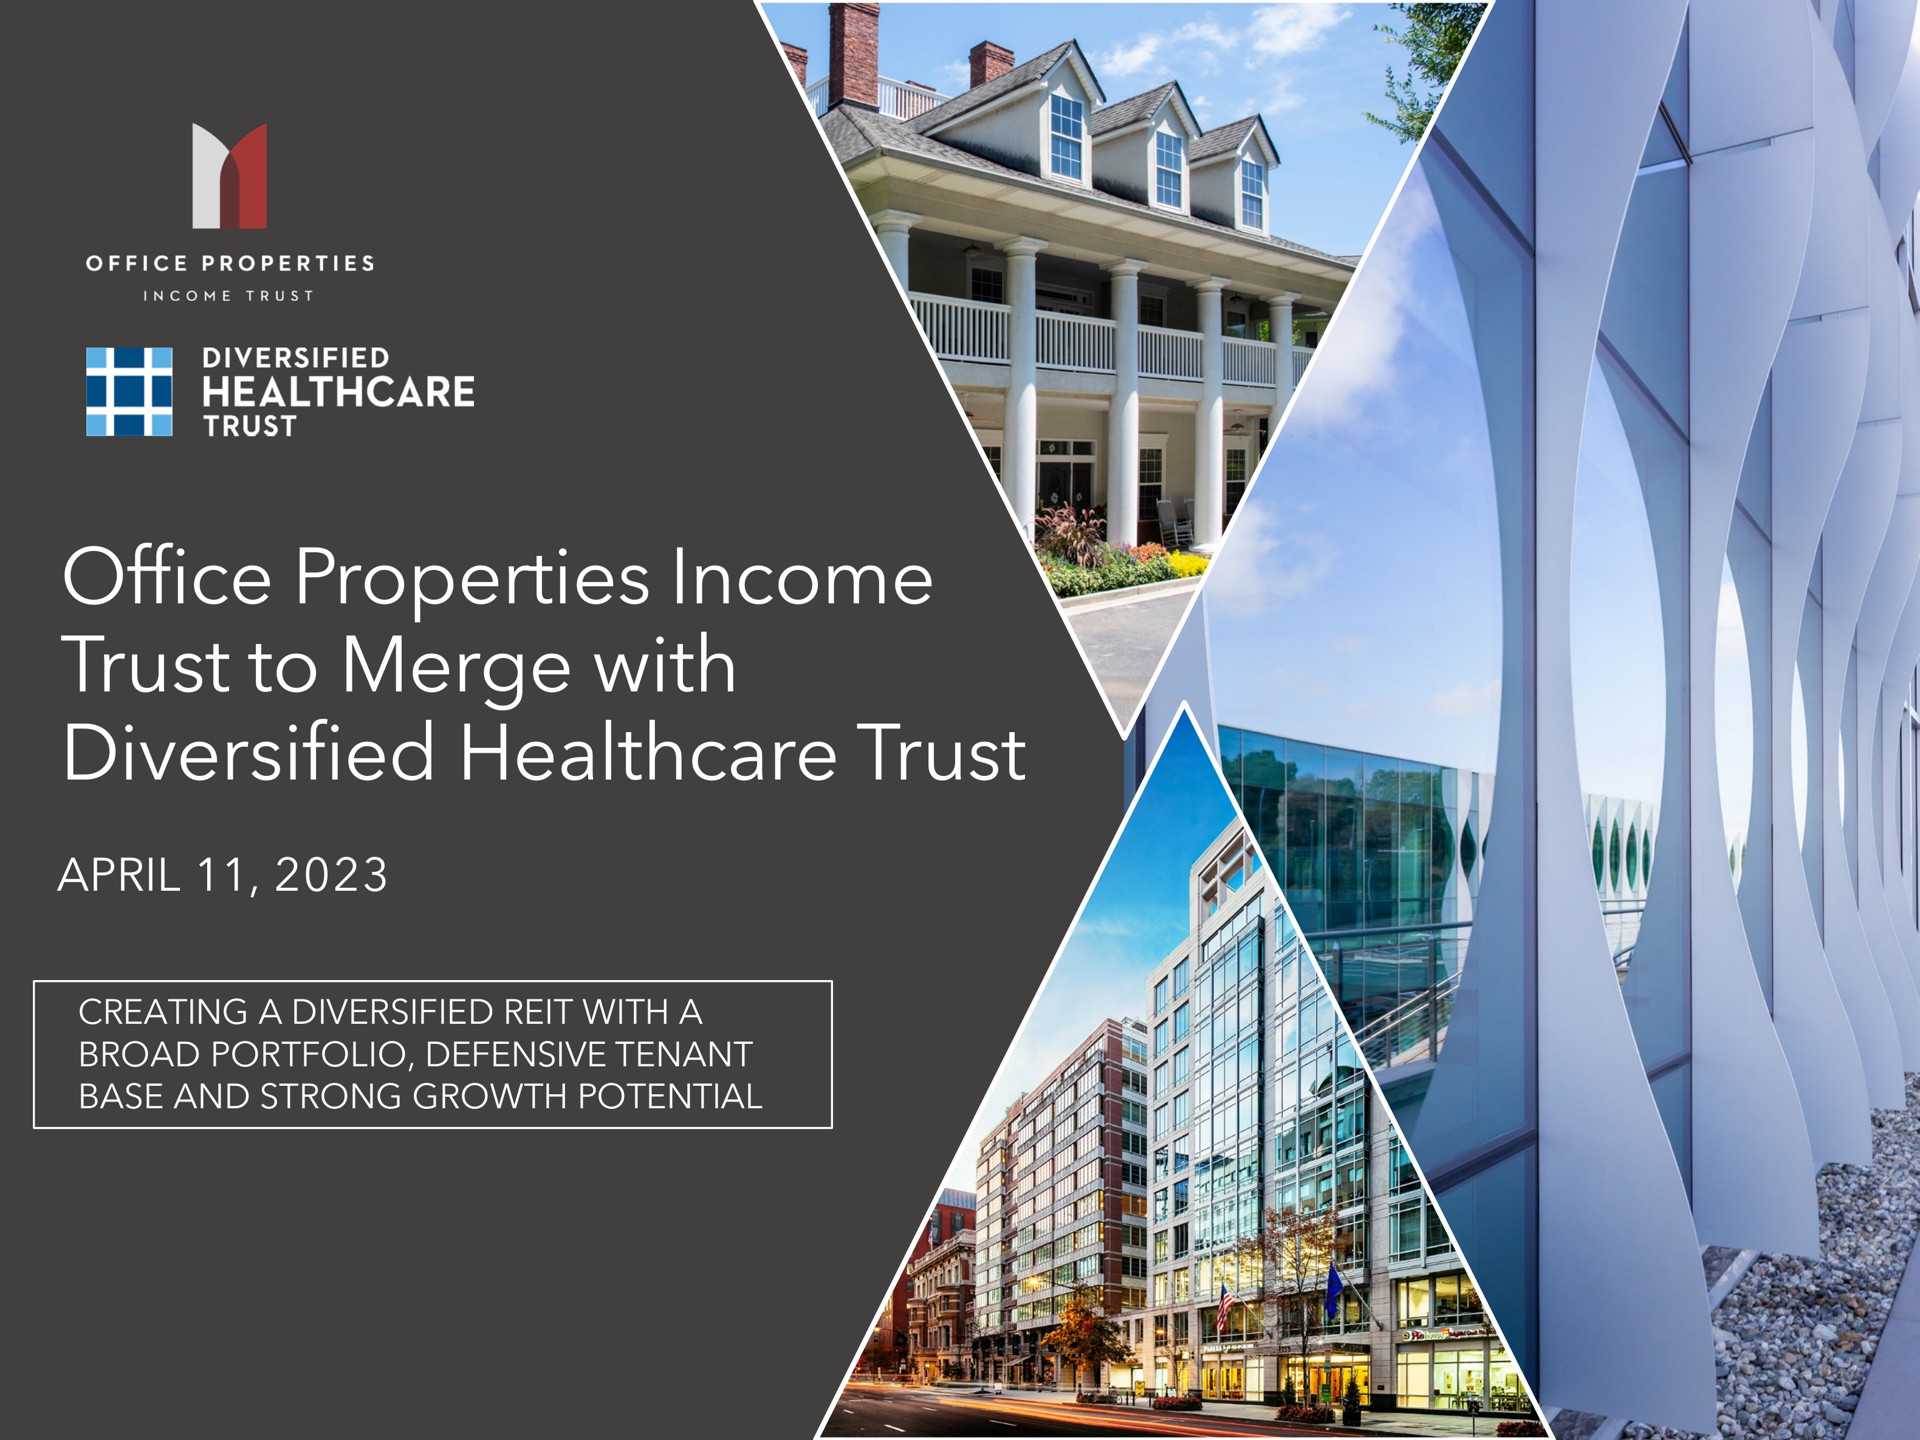 office properties income trust to merge with diversified trust | Office Properties Income Trust